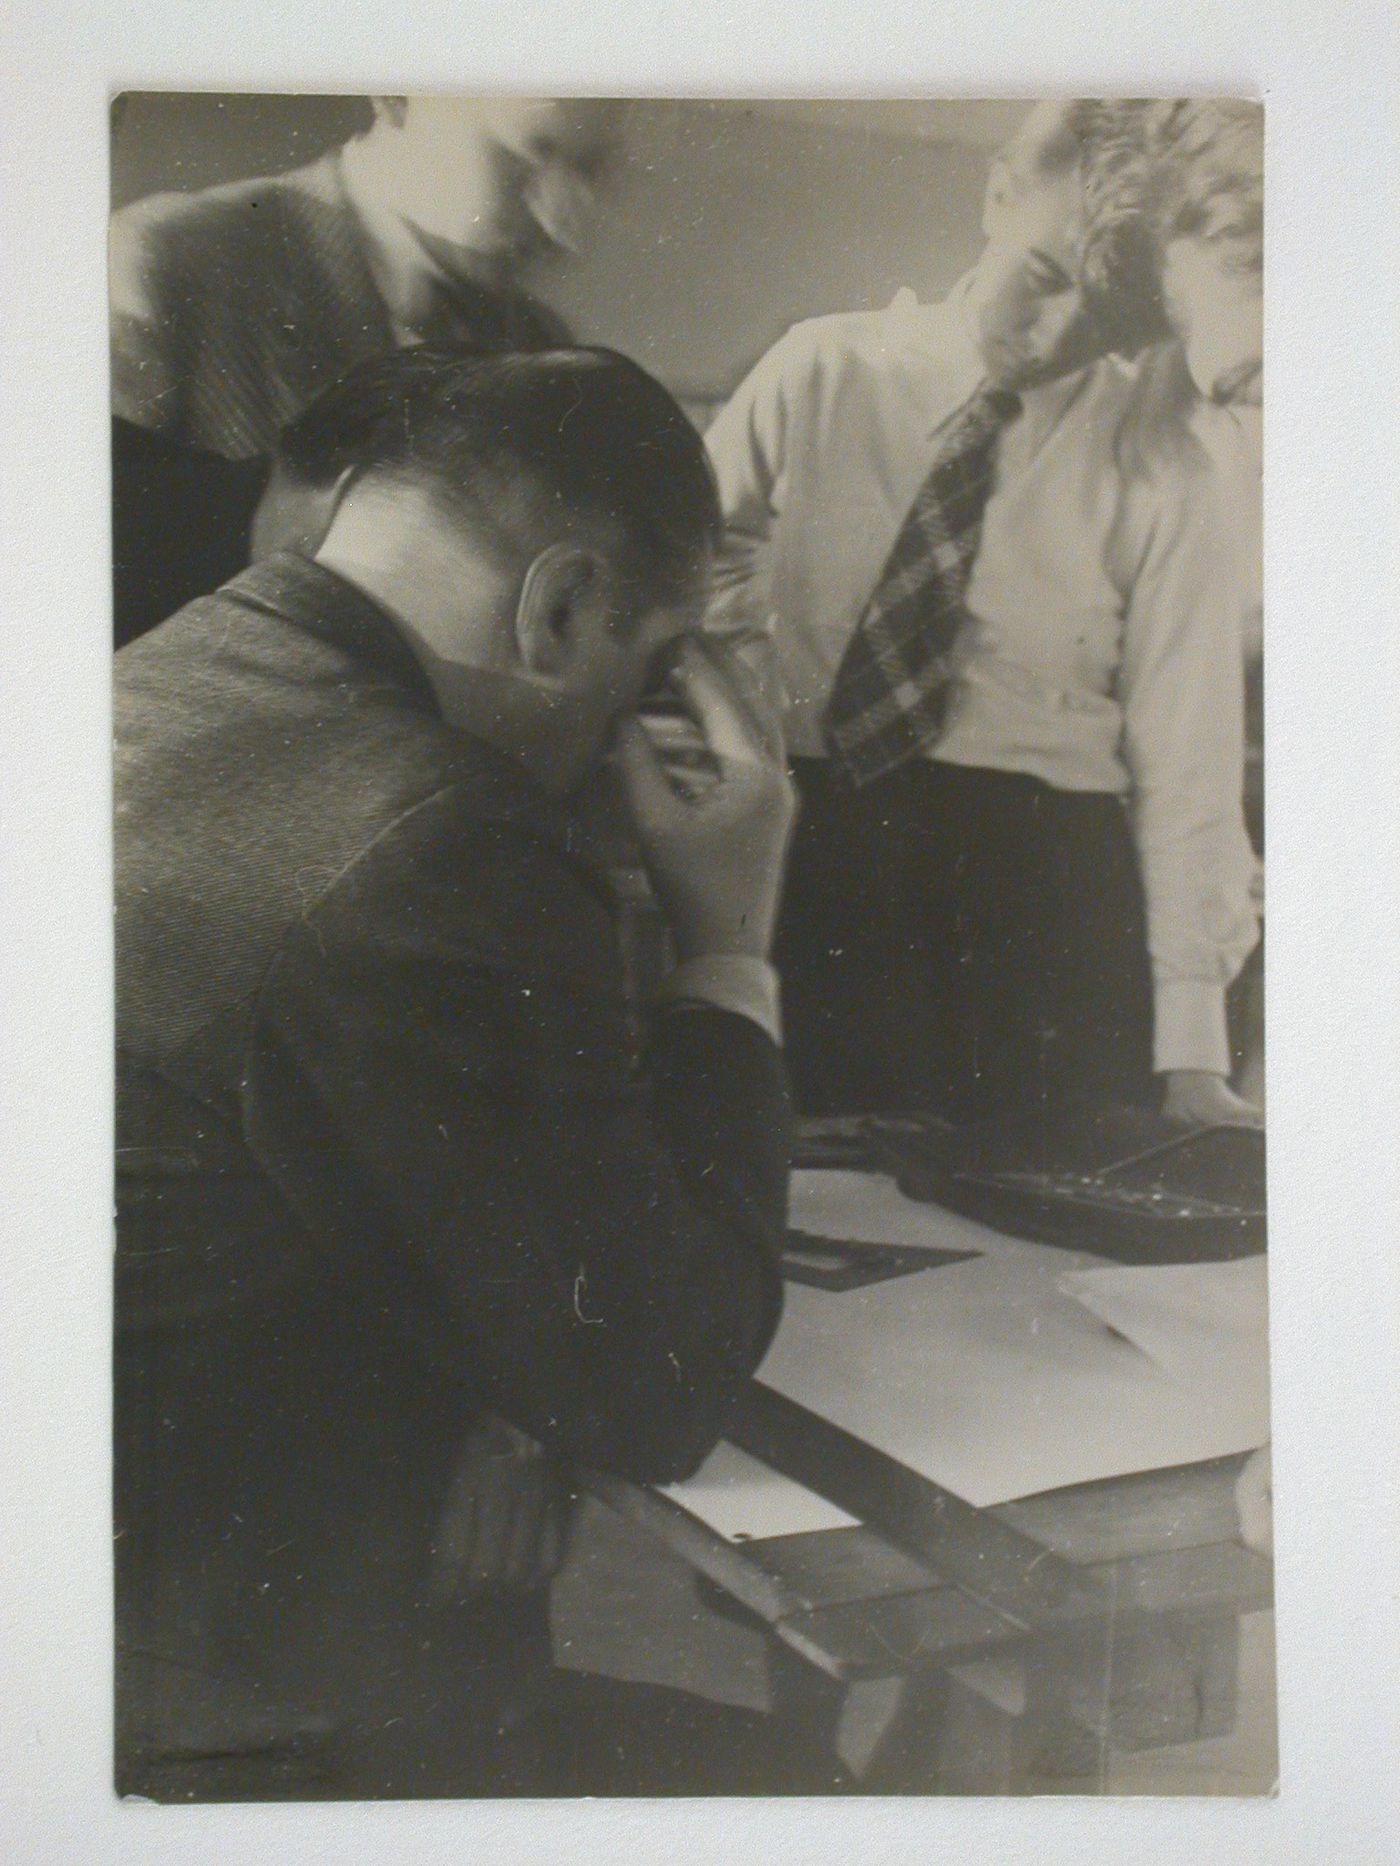 Mies van der Rohe conducting a seminar at the Bauhaus with Herman Klumpp and two other students, Dessau, Germany